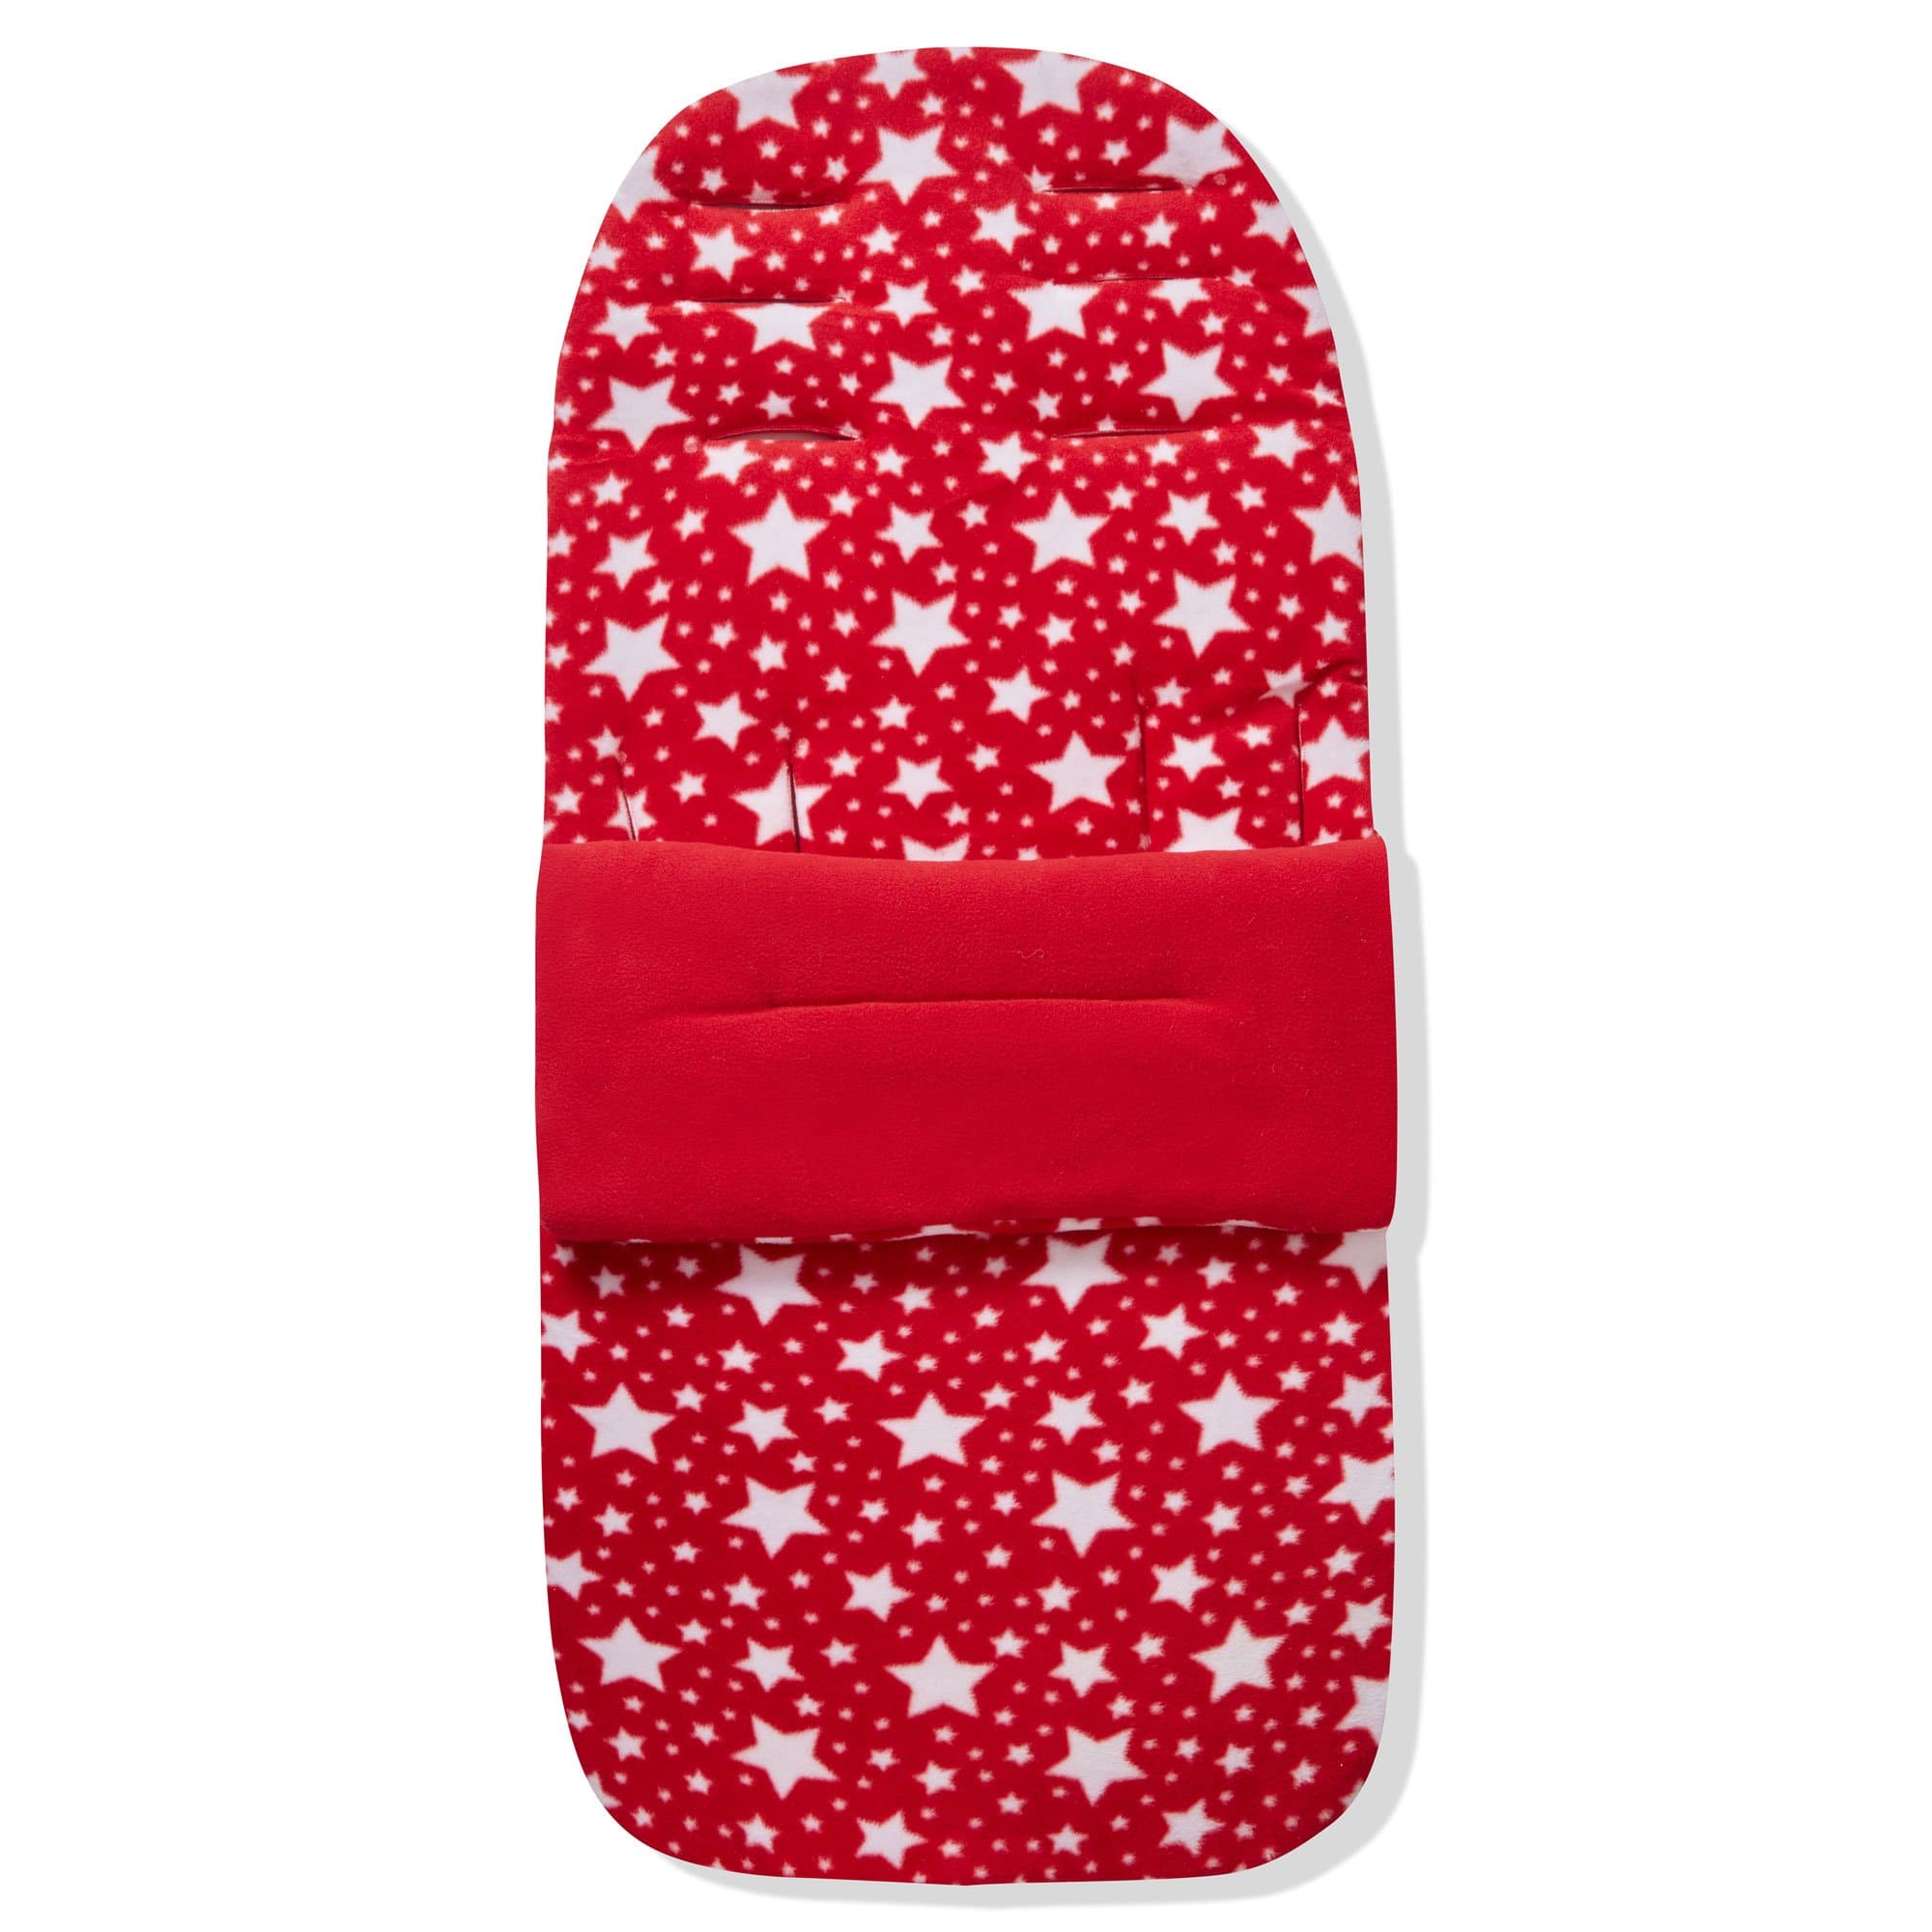 Fleece Footmuff / Cosy Toes Compatible with Babystyle - Red Star / Fits All Models | For Your Little One